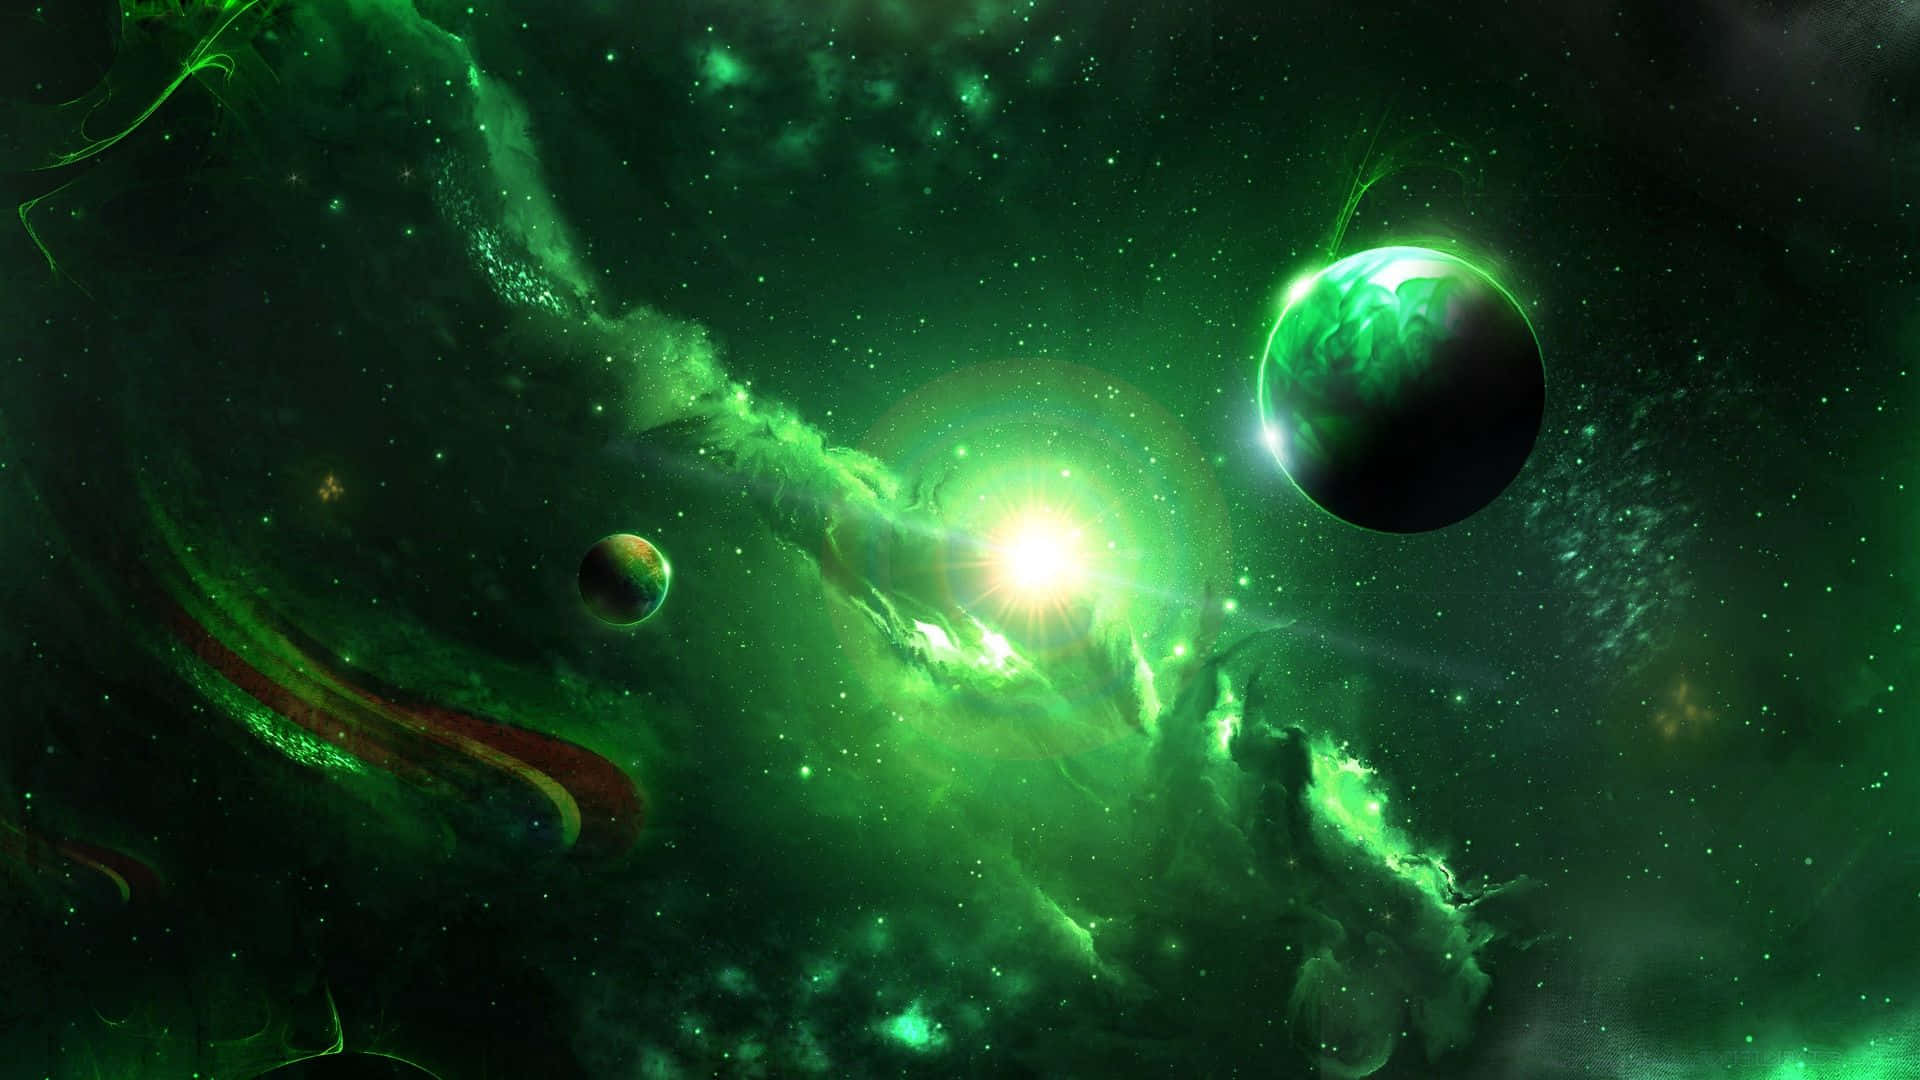 100+] Green Galaxy Backgrounds